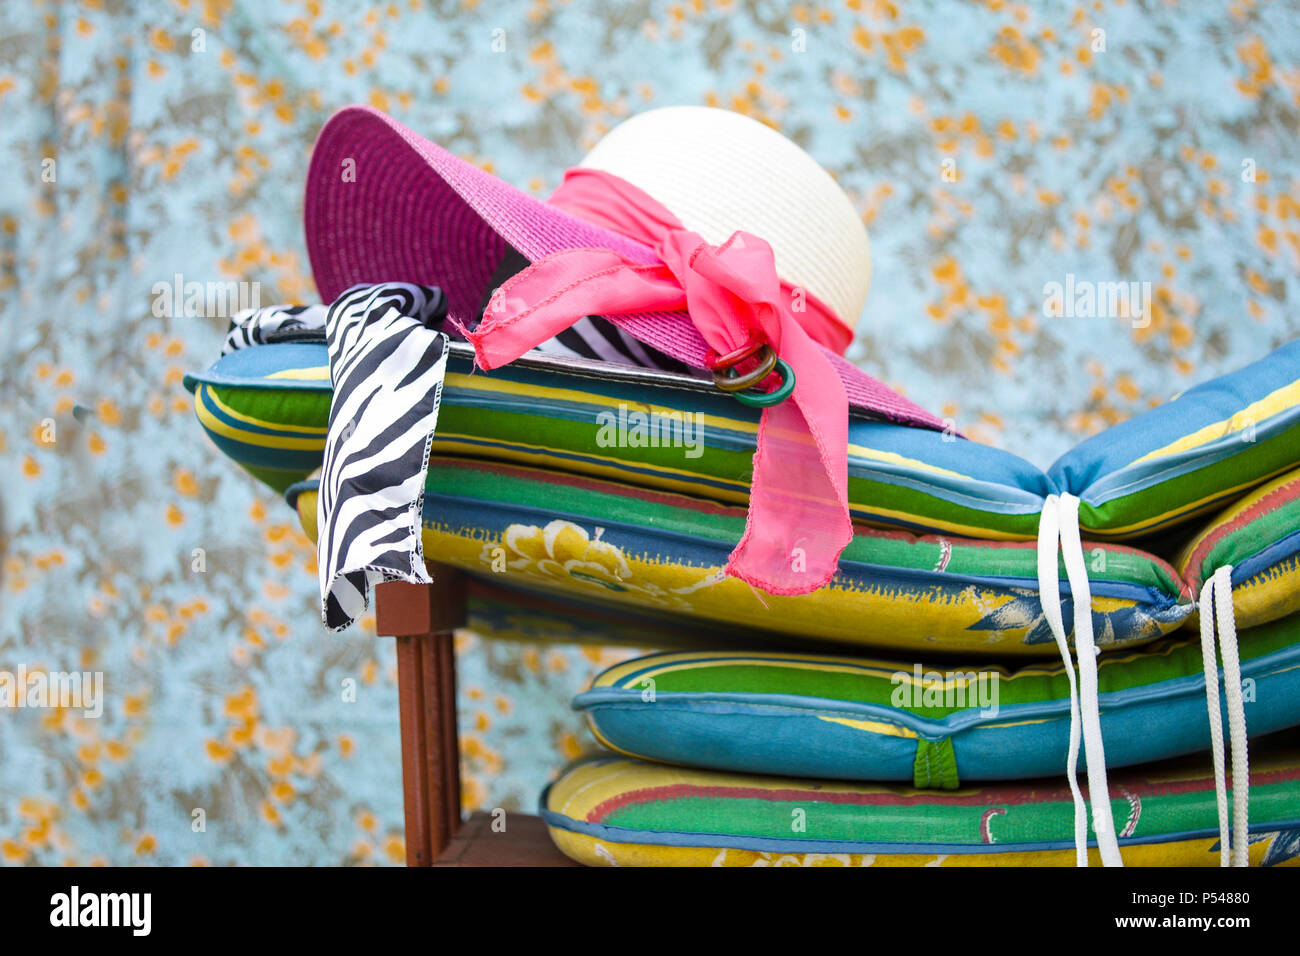 Ladies wide brimmed hats laid on the top of colorful mattresses Stock Photo